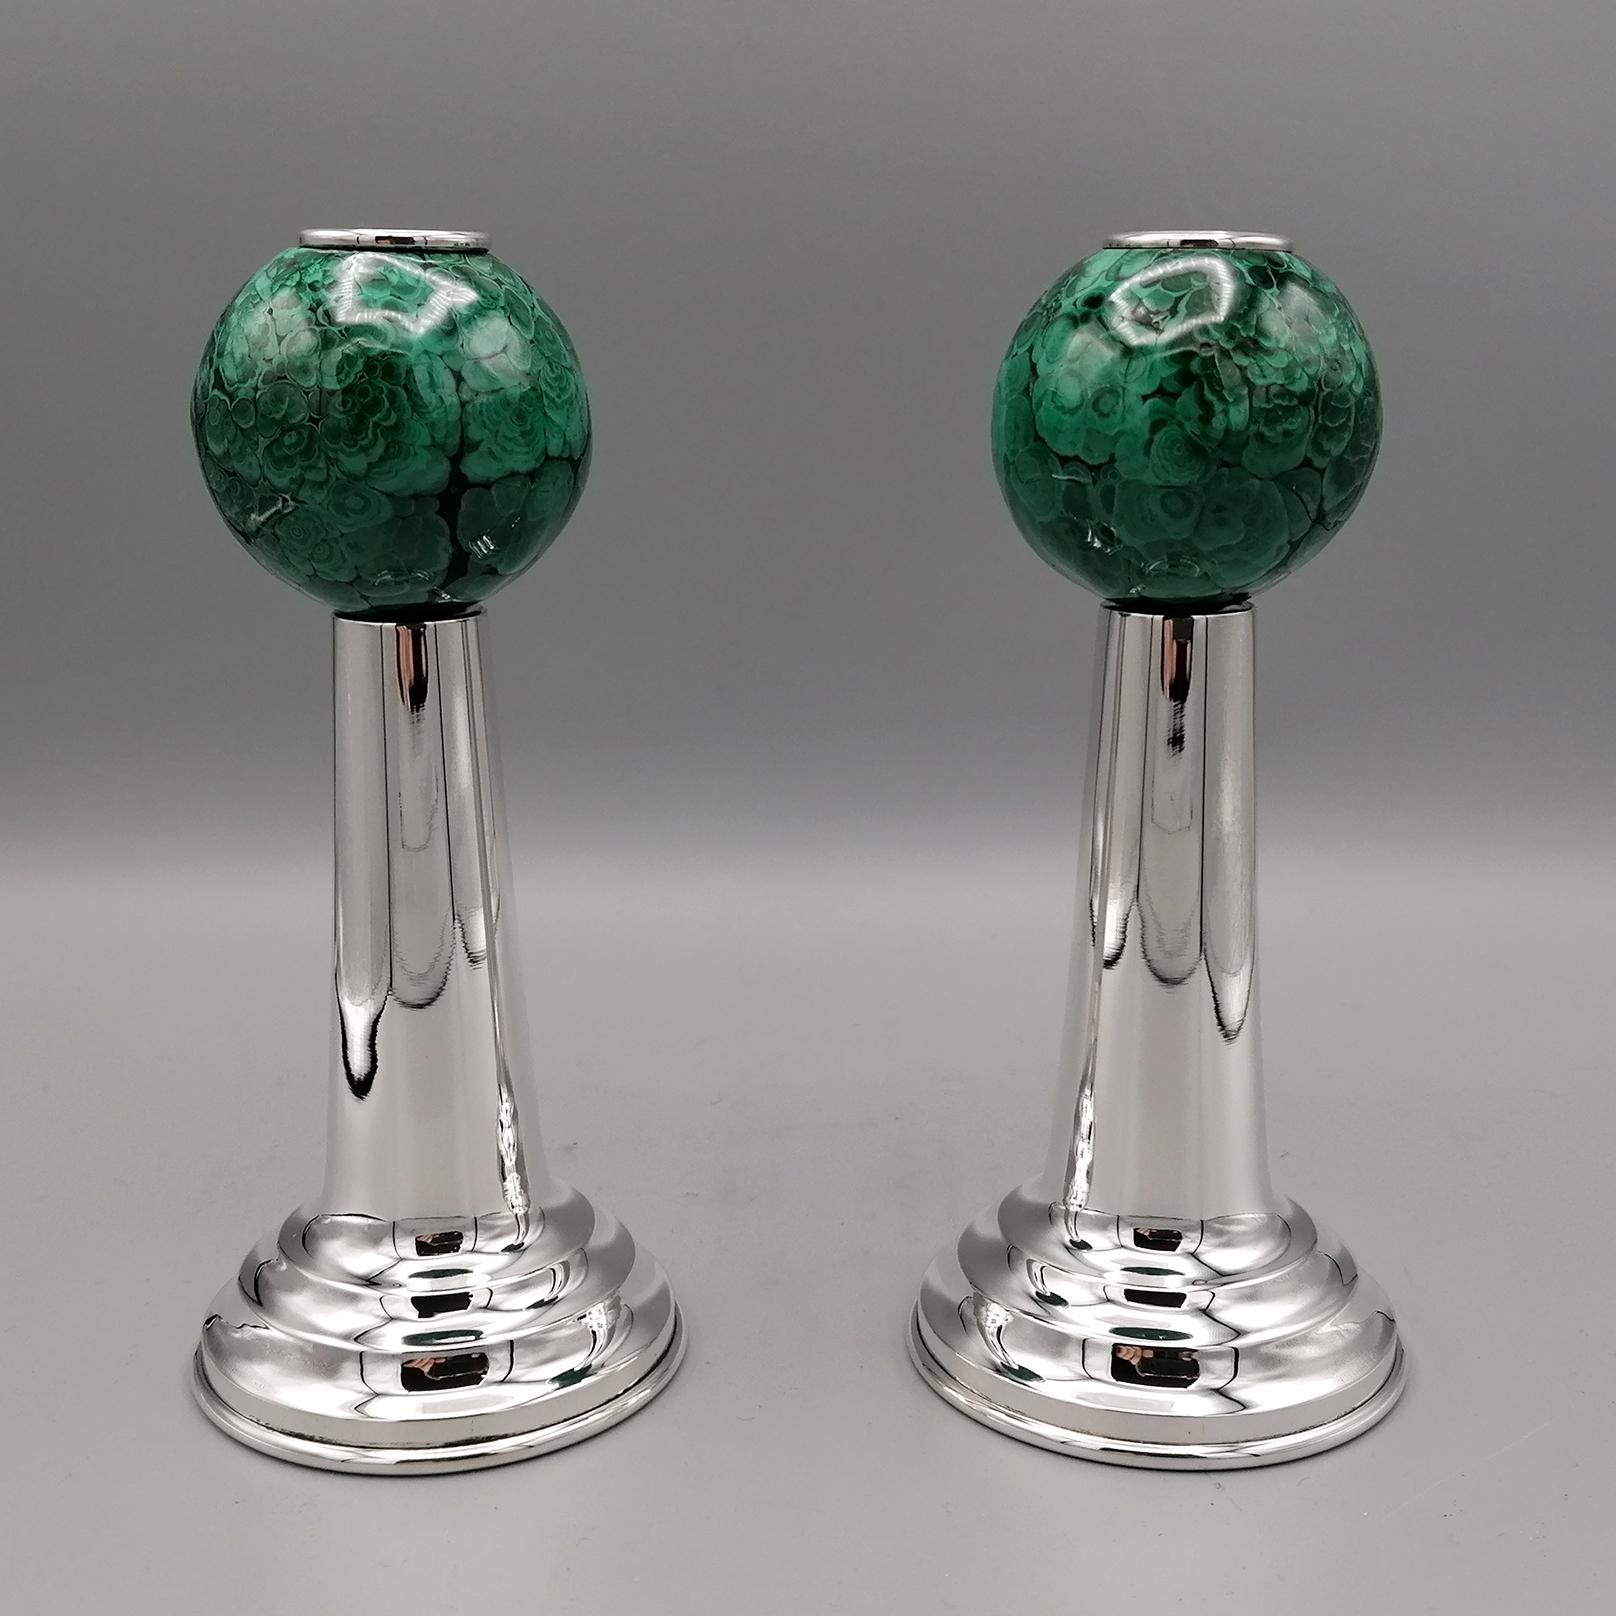 Pair of Italian candlesticks in sterling silver.
The base of the candlesticks, finished on the bottom with a disc of briar, is round with steps that make it brilliant and balanced. 
The stem is smooth and conical which ends with a ball-shaped